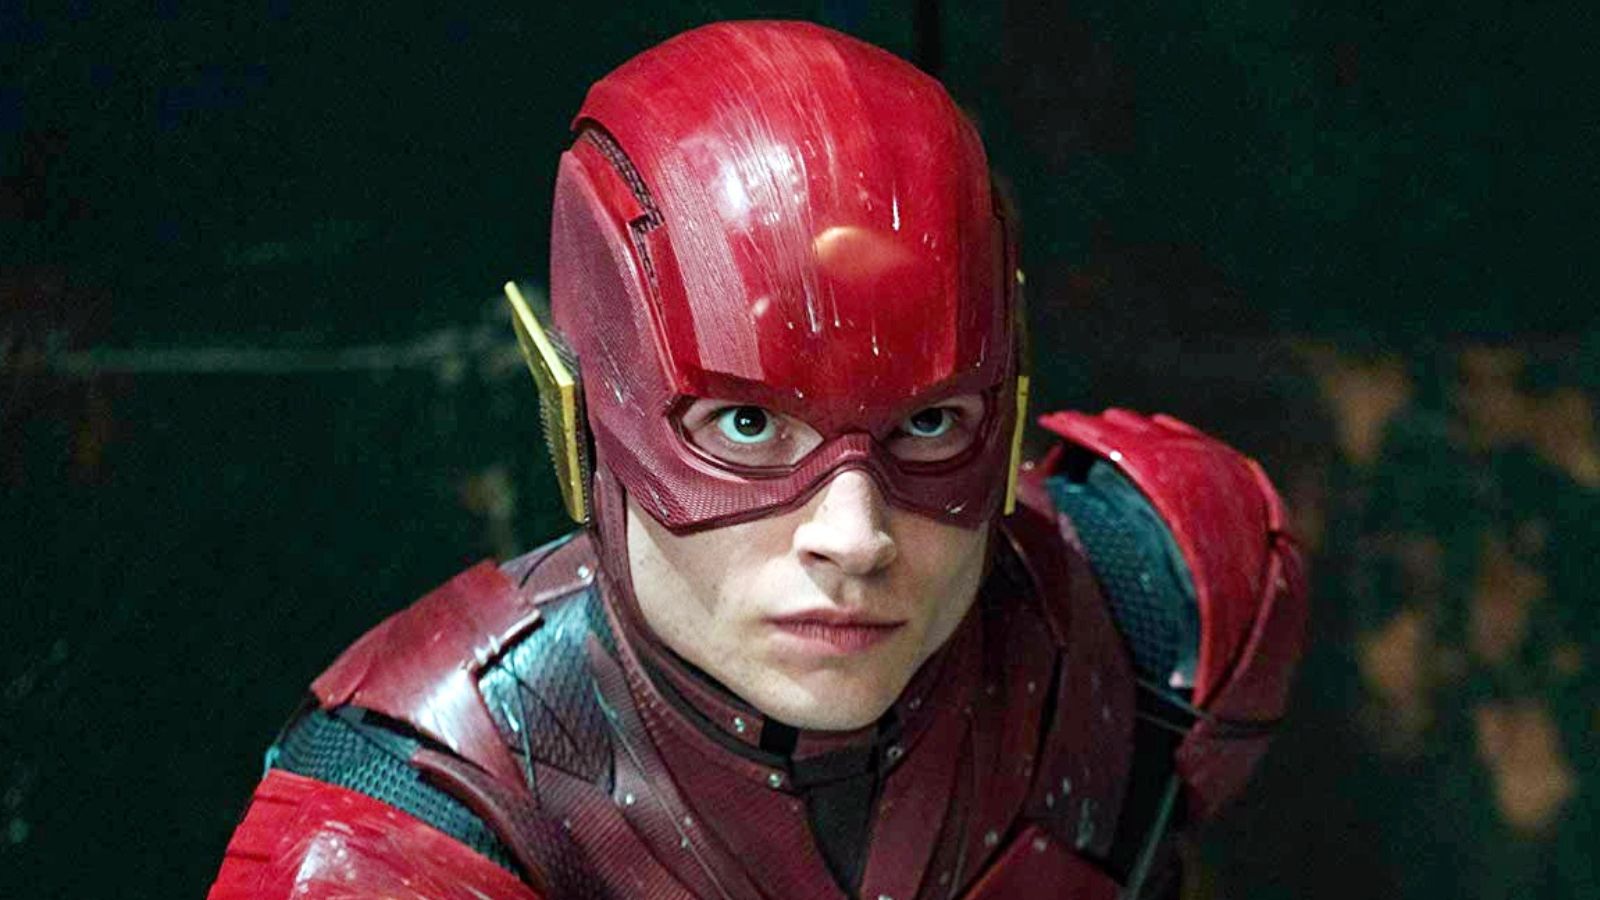 Hype builds for 'The Flash' thanks to prequel comic